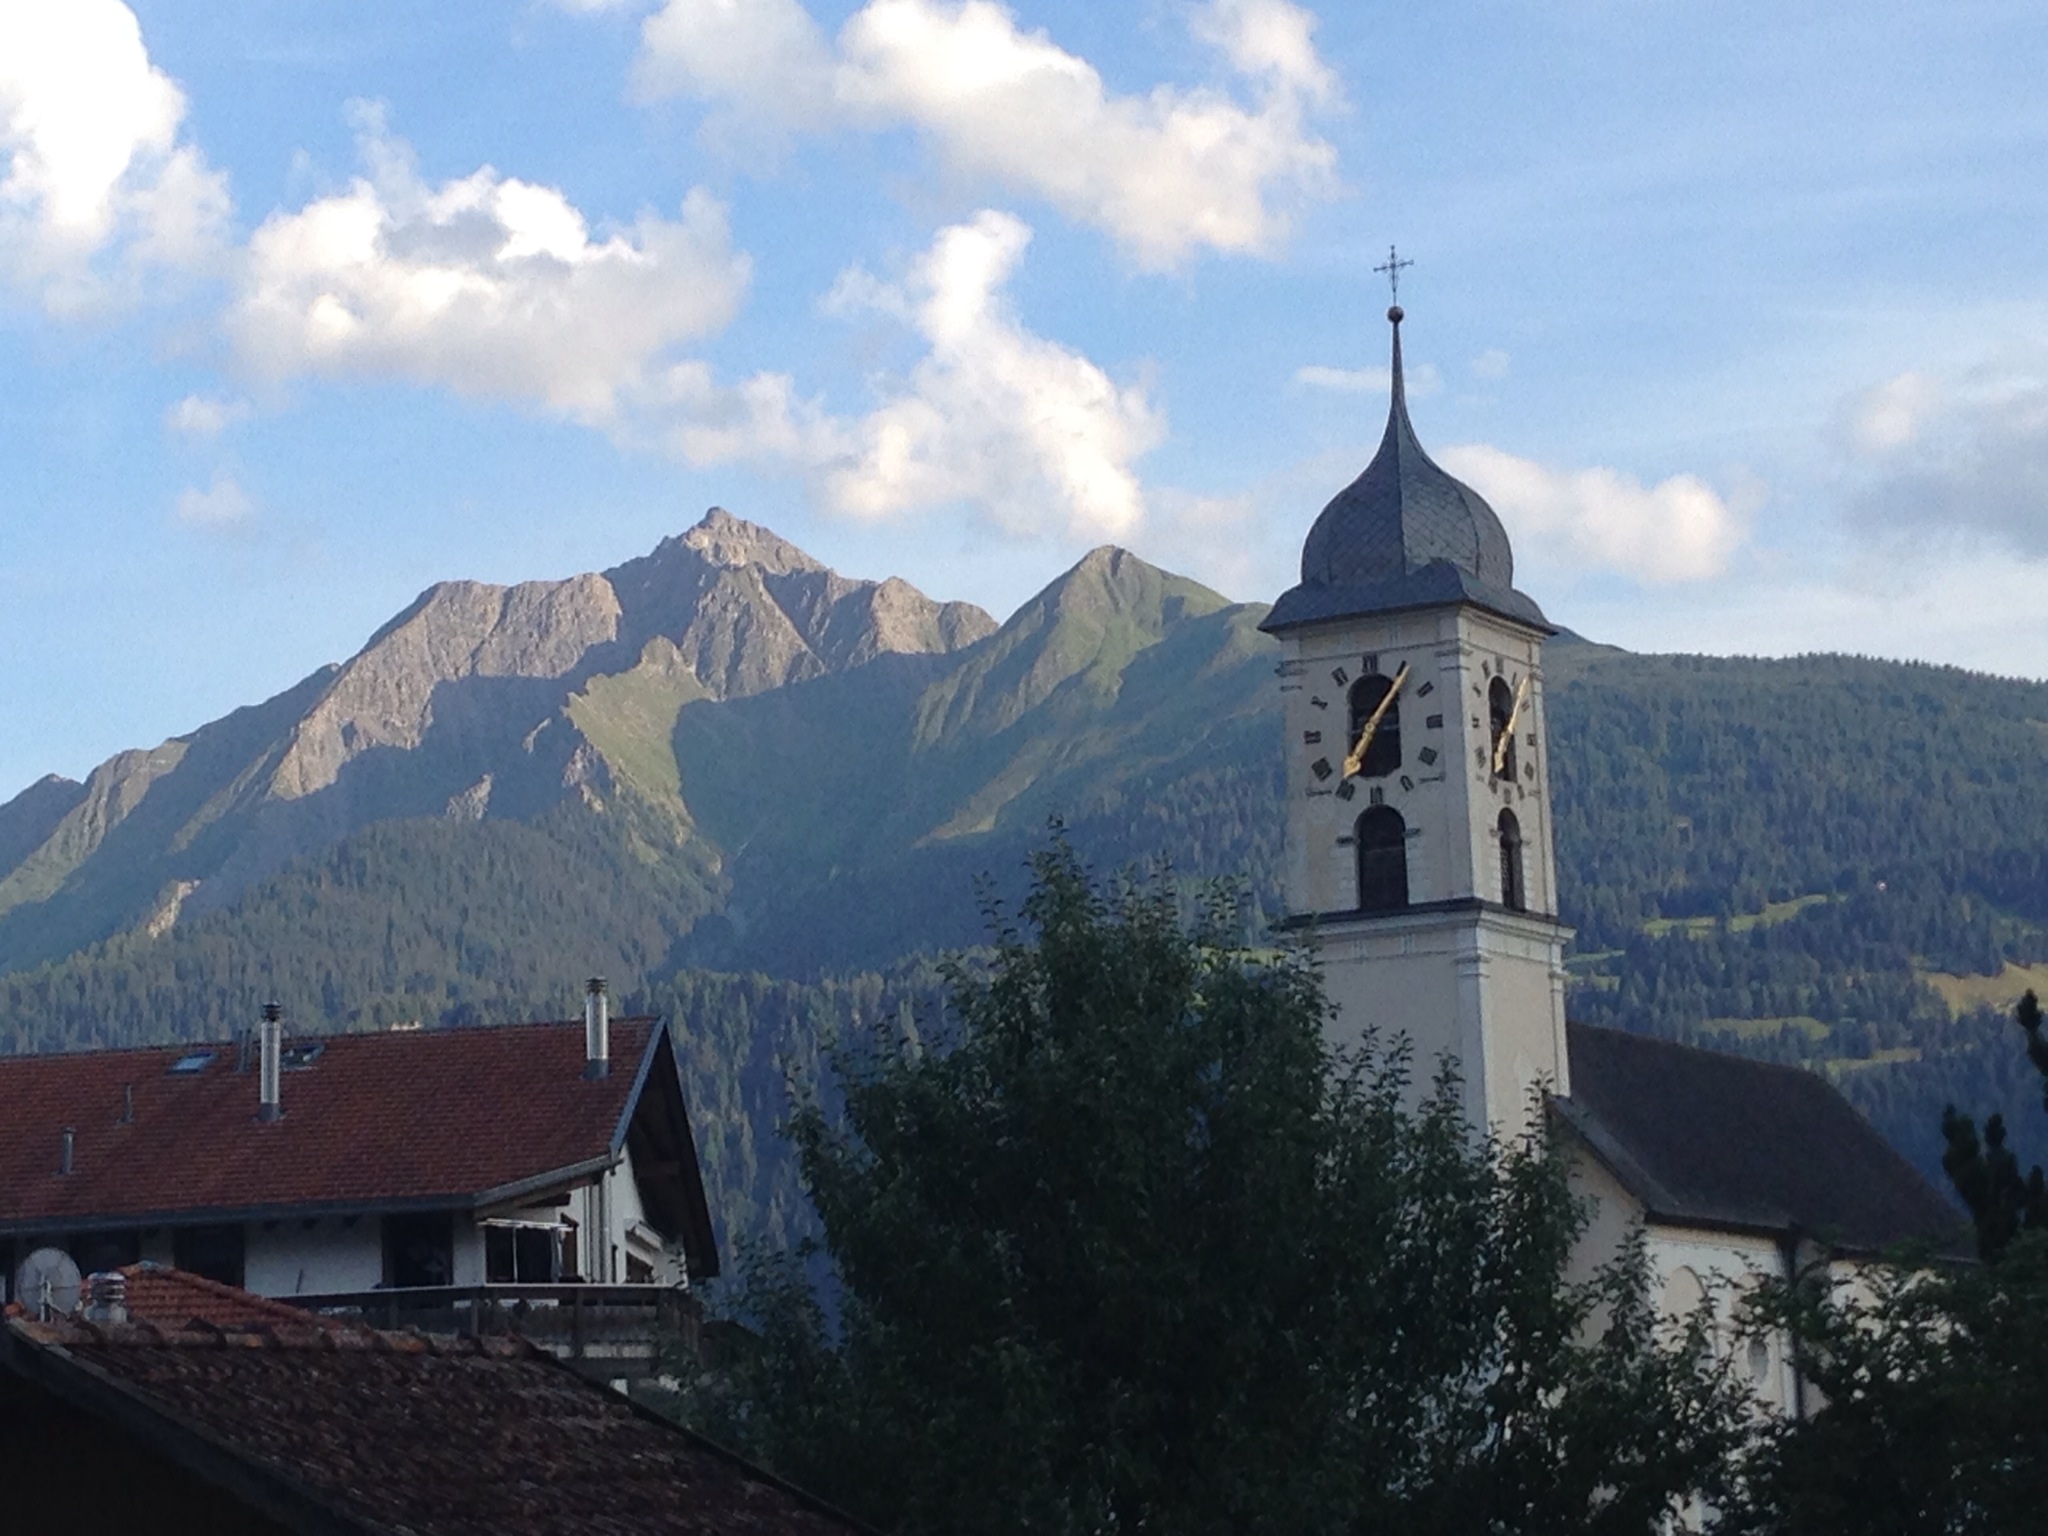 A very typical bell tower; Laax, Switzerland